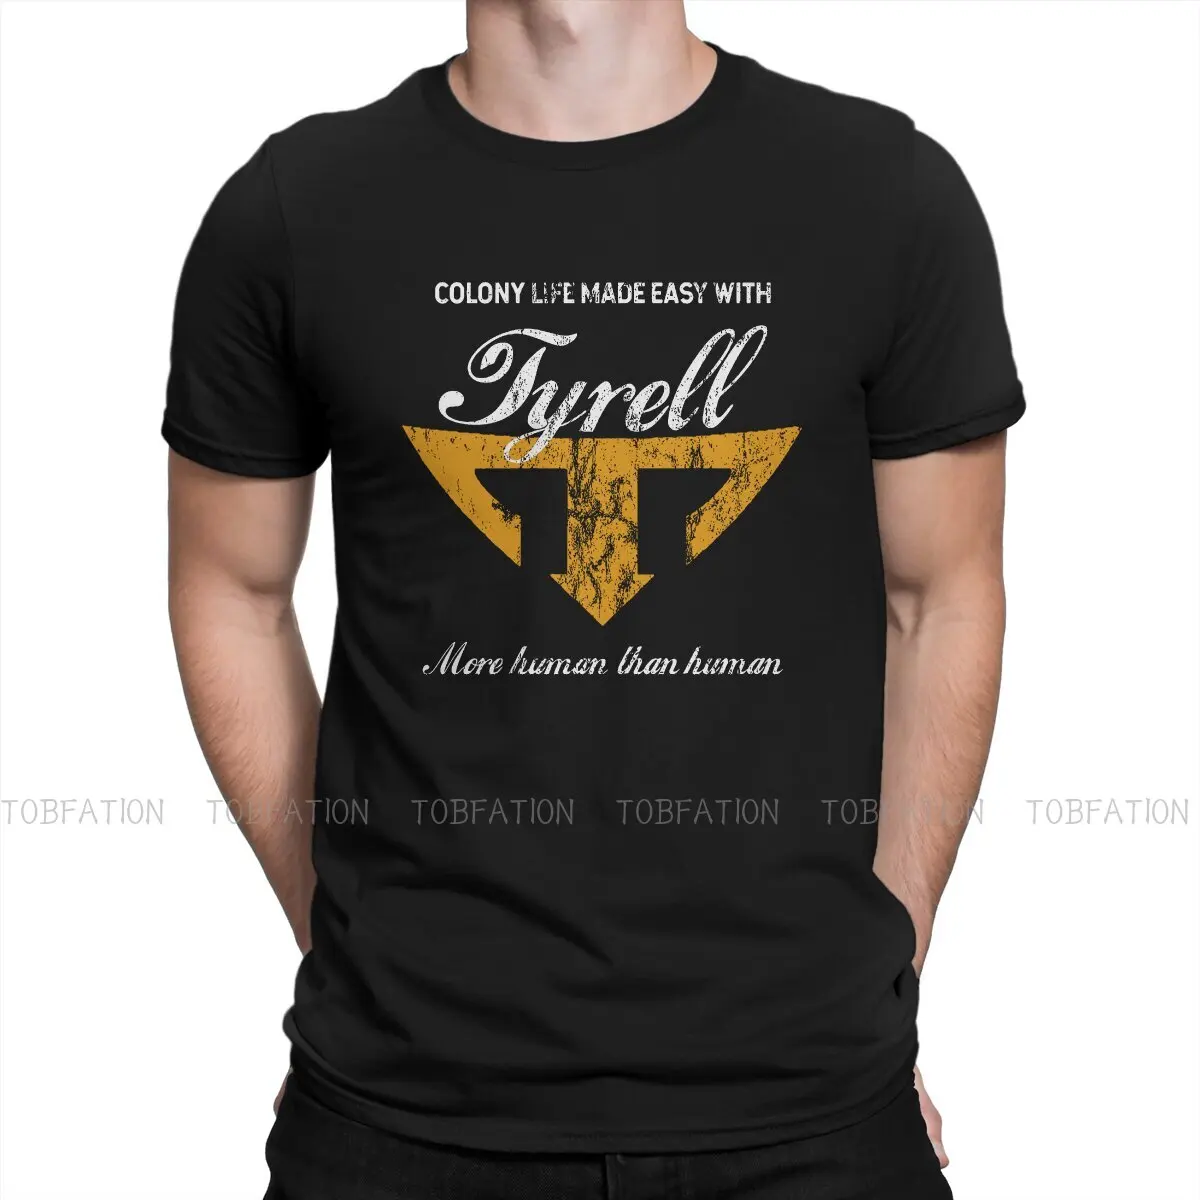 Bladerunner 2049 Film Colony Life Made Easy With Tyrell TShirt Men Gothic Big Size Casual Crewneck Cotton T Shirt 2020